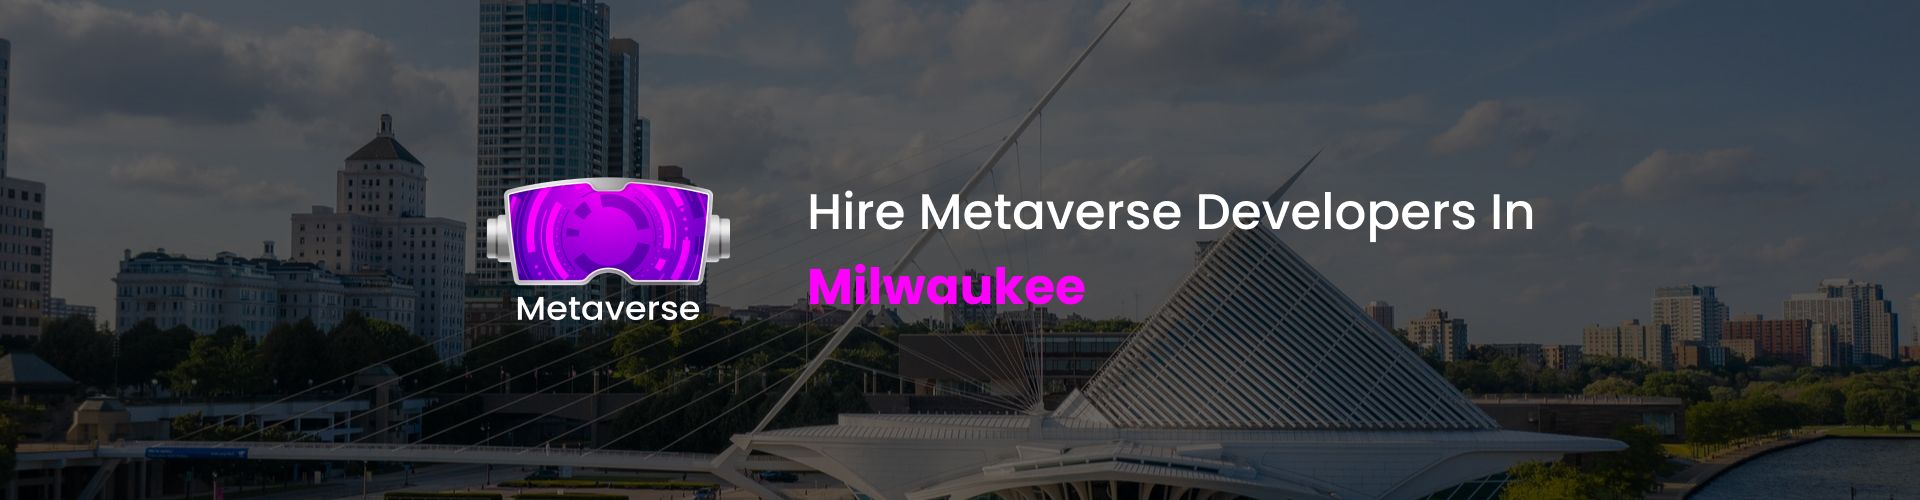 hire metaverse developers in milwaukee